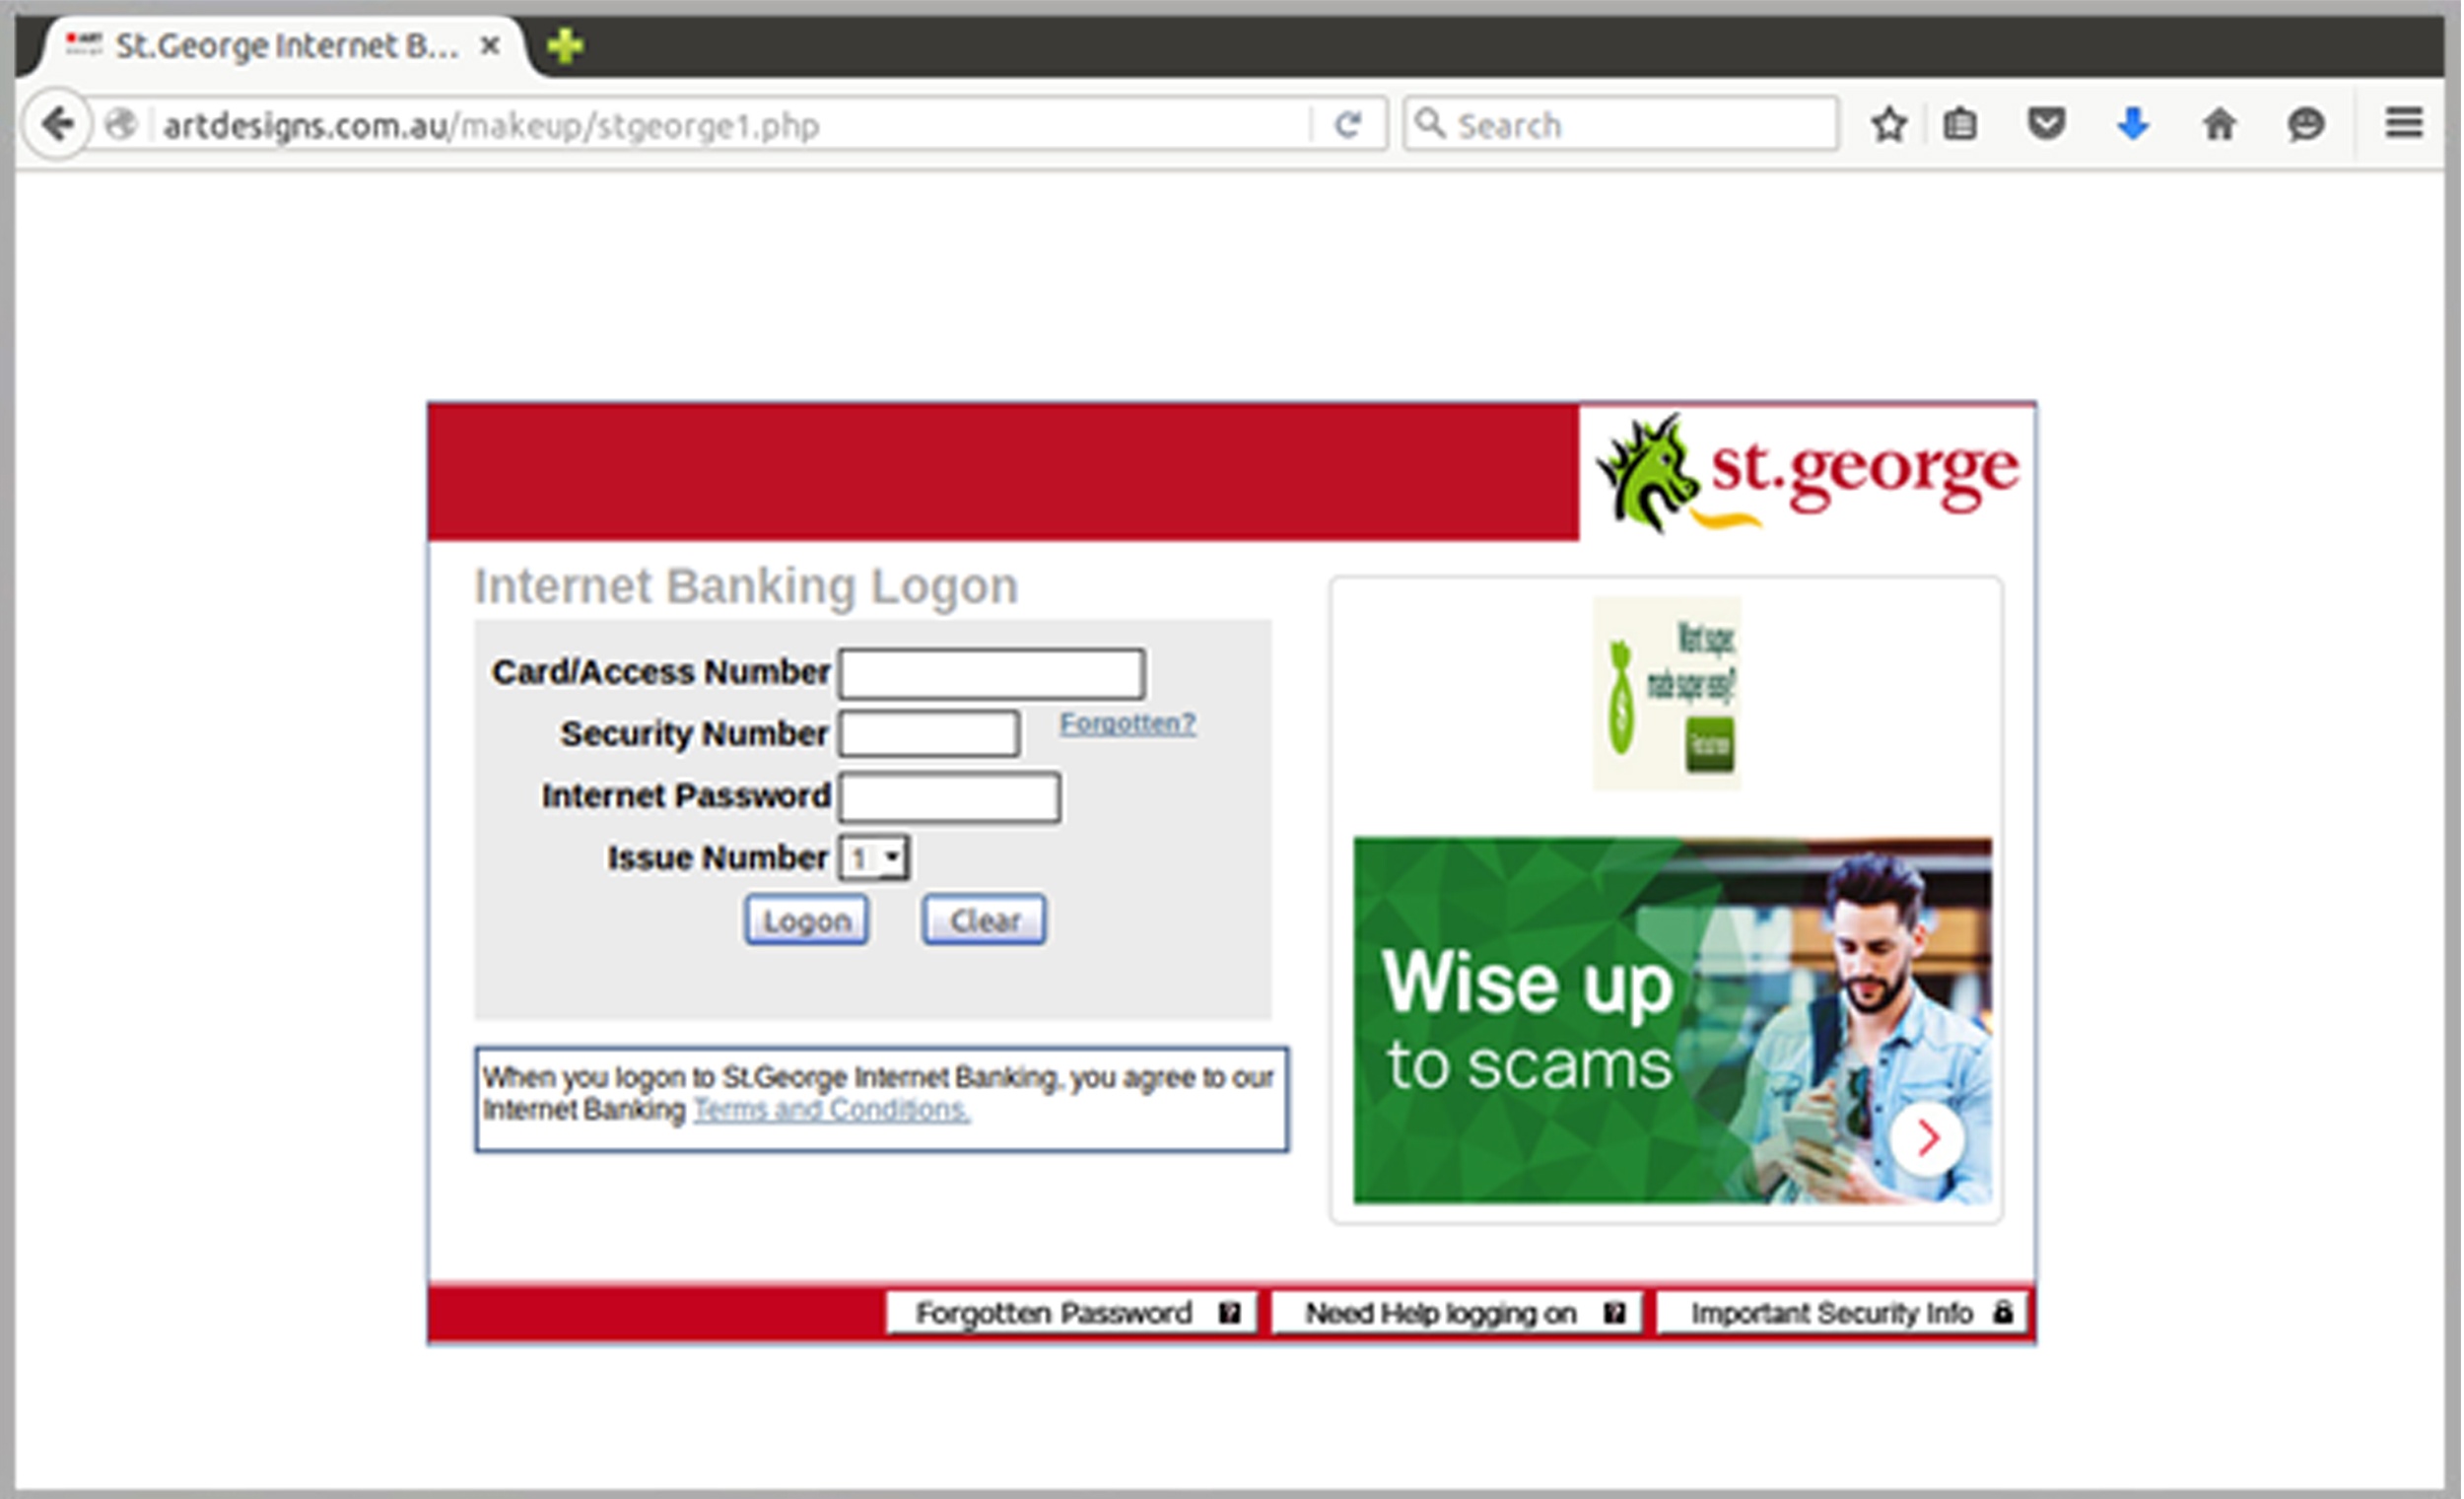 MailGuard_St_George_Bank_Phishing_Email_Landing_Page_Sample_1_May_2016.jpg